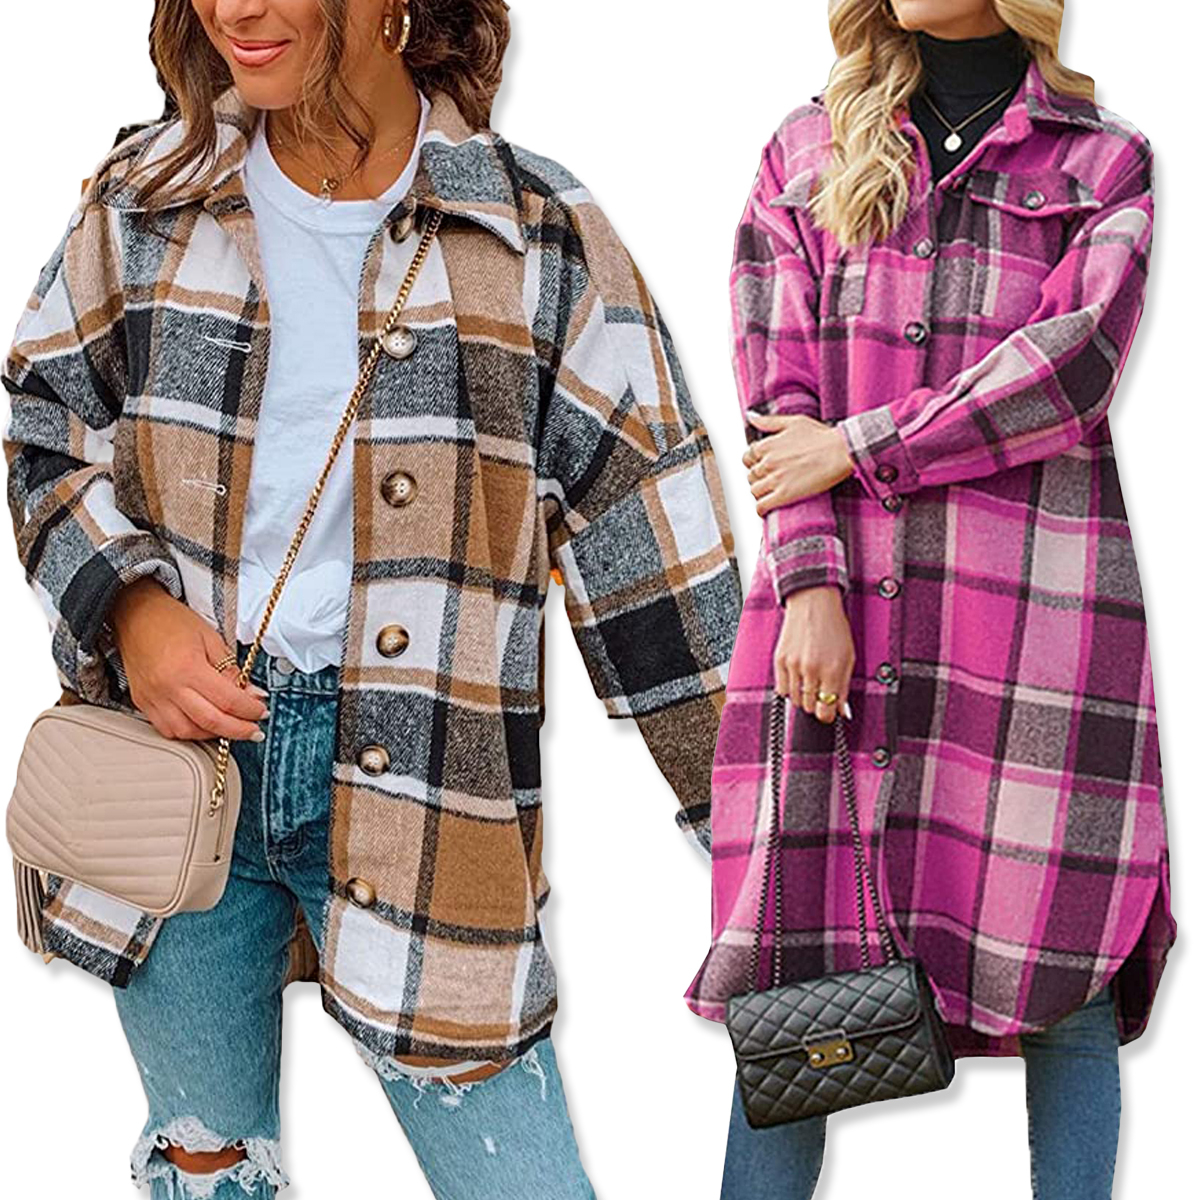 Fall in Love With Amazon’s Best Deals on the Top-Rated Flannels